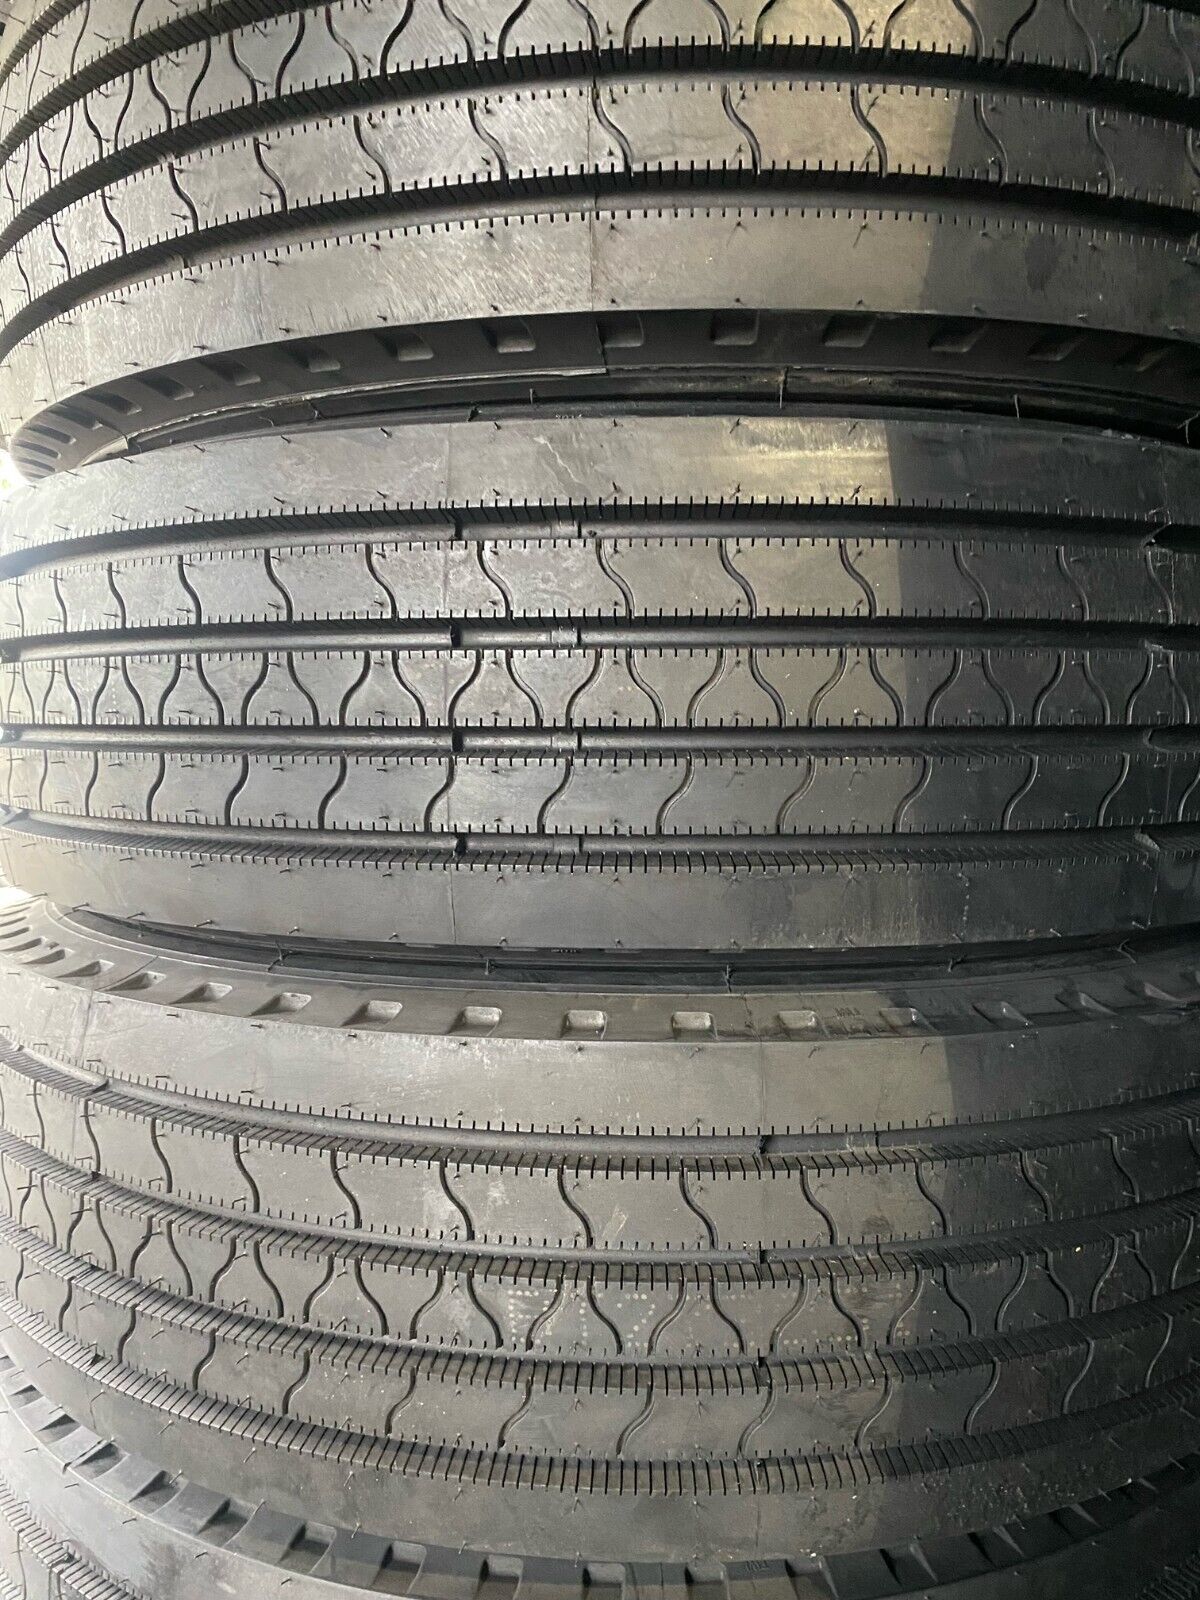 225/70R19.5 (1-TIRE) ROAD CREW TB STEER - 128/126M STEER ALL POSITIONS TIRE